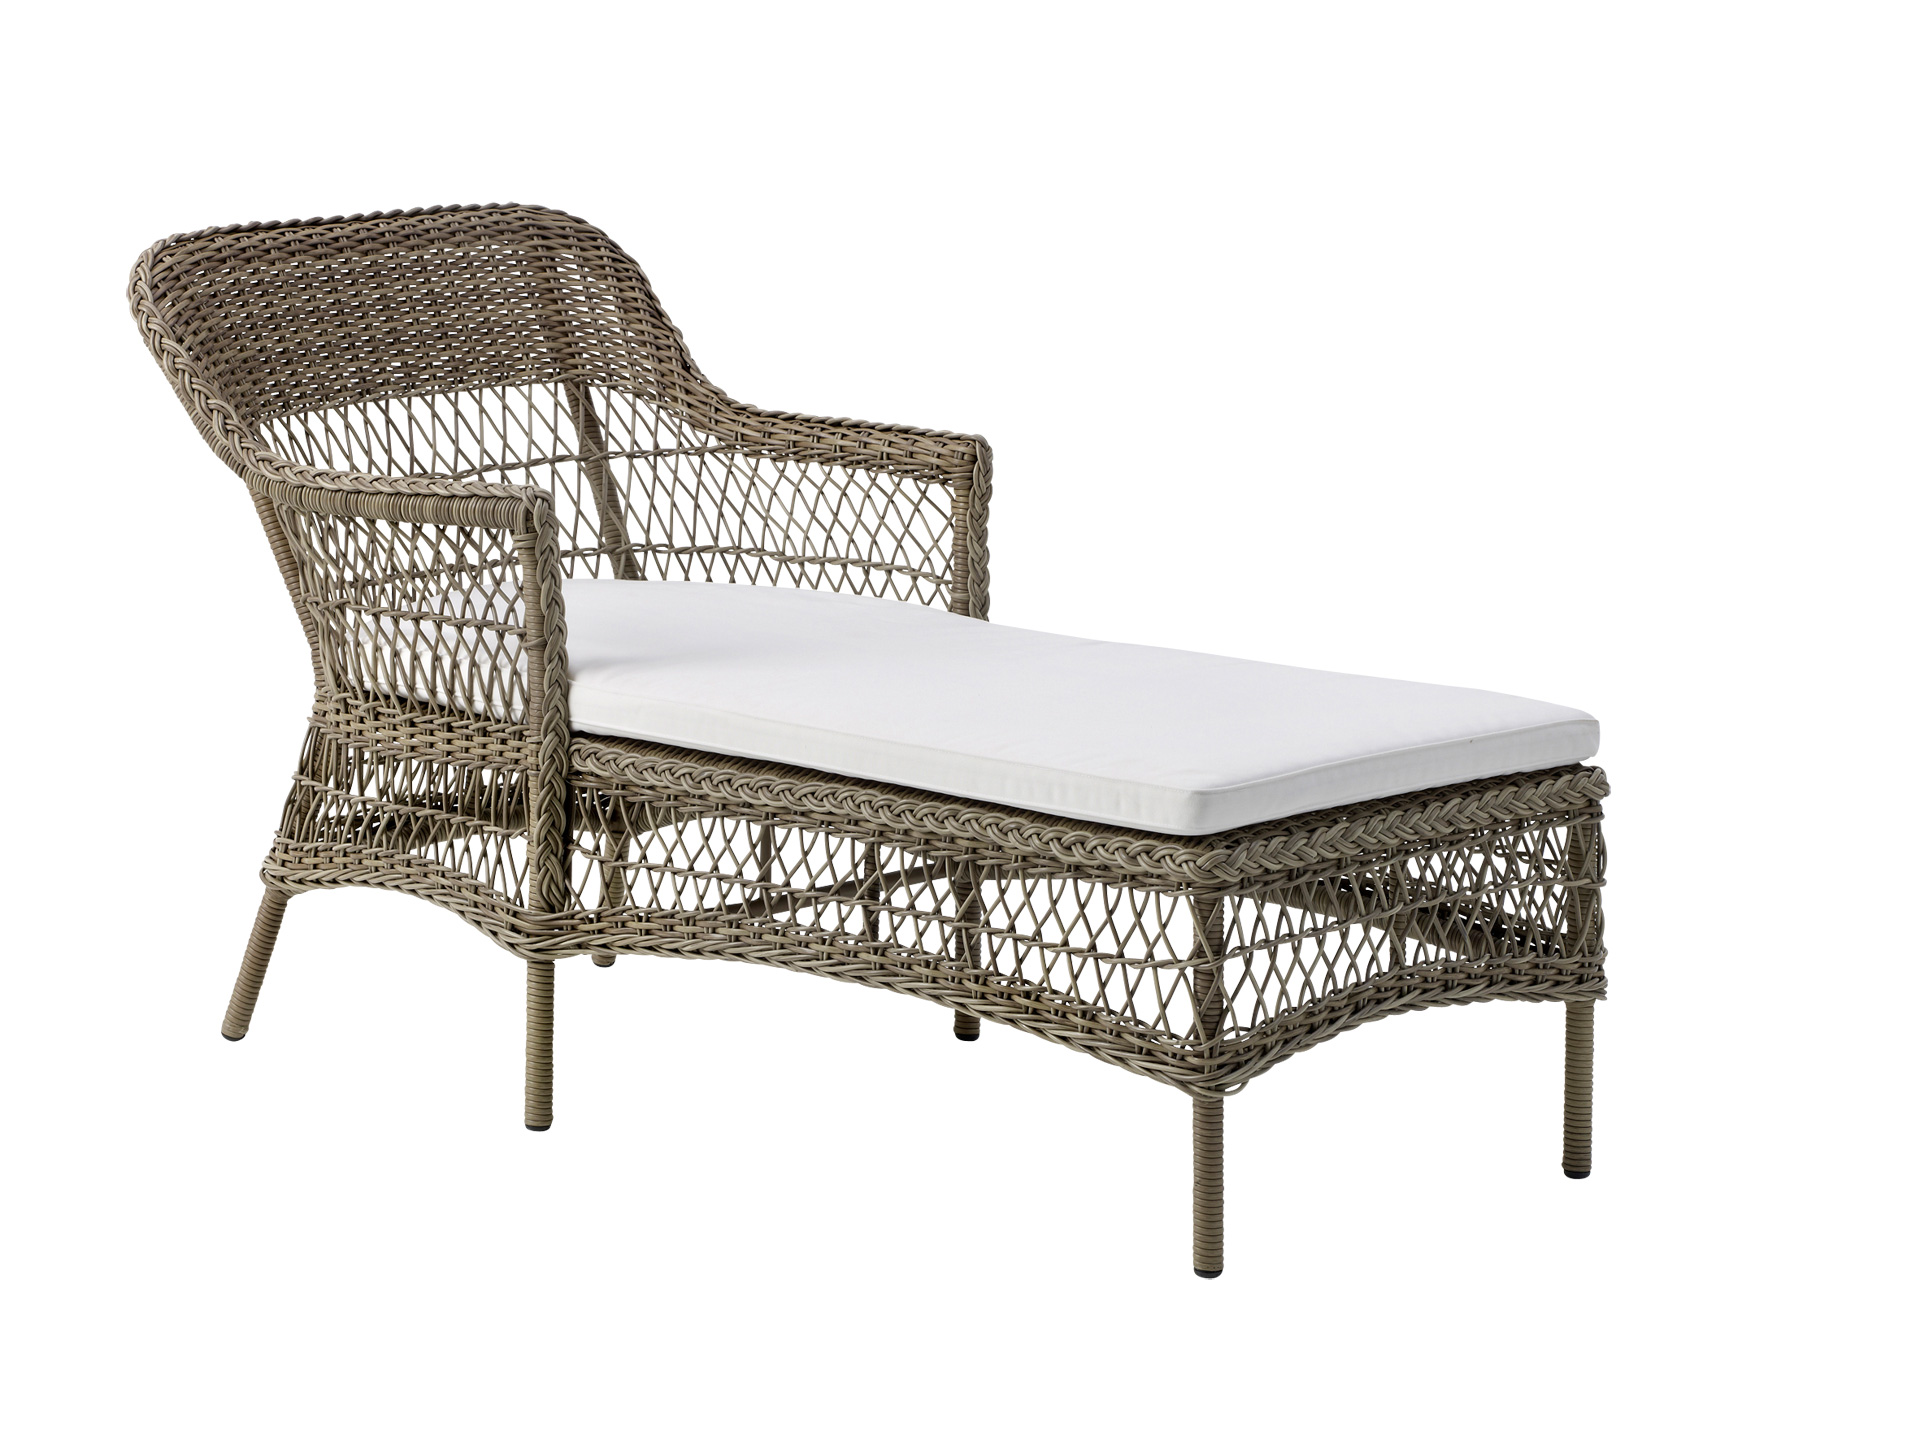 Olivia Exterior Chaise Lounge